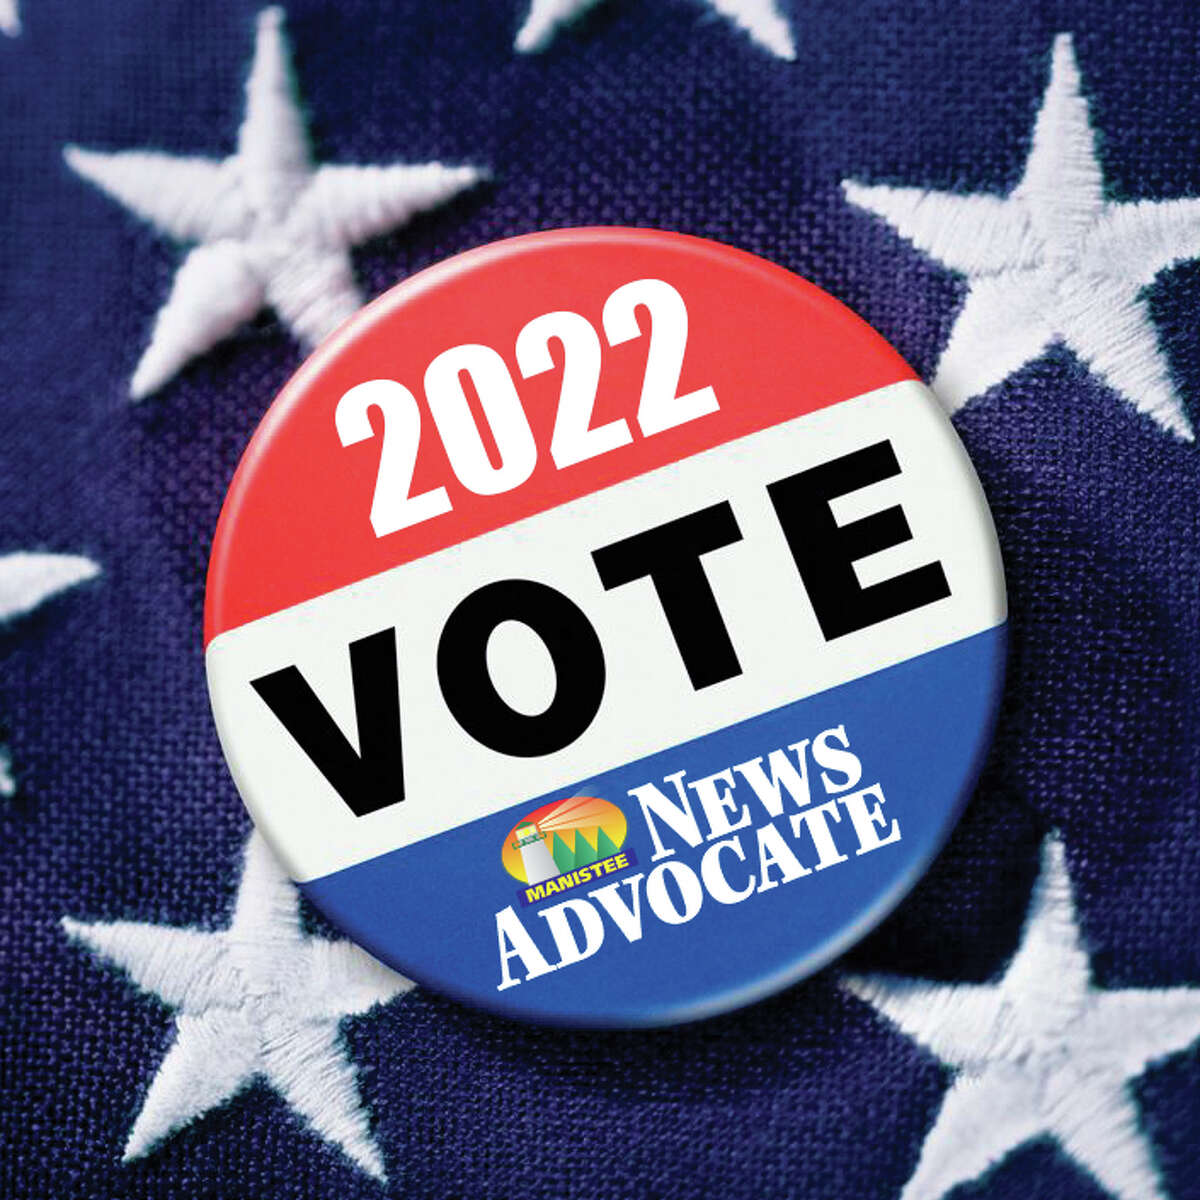 Voters in Manistee County will have the opportunity to make their voices heard in several elections in 2022.